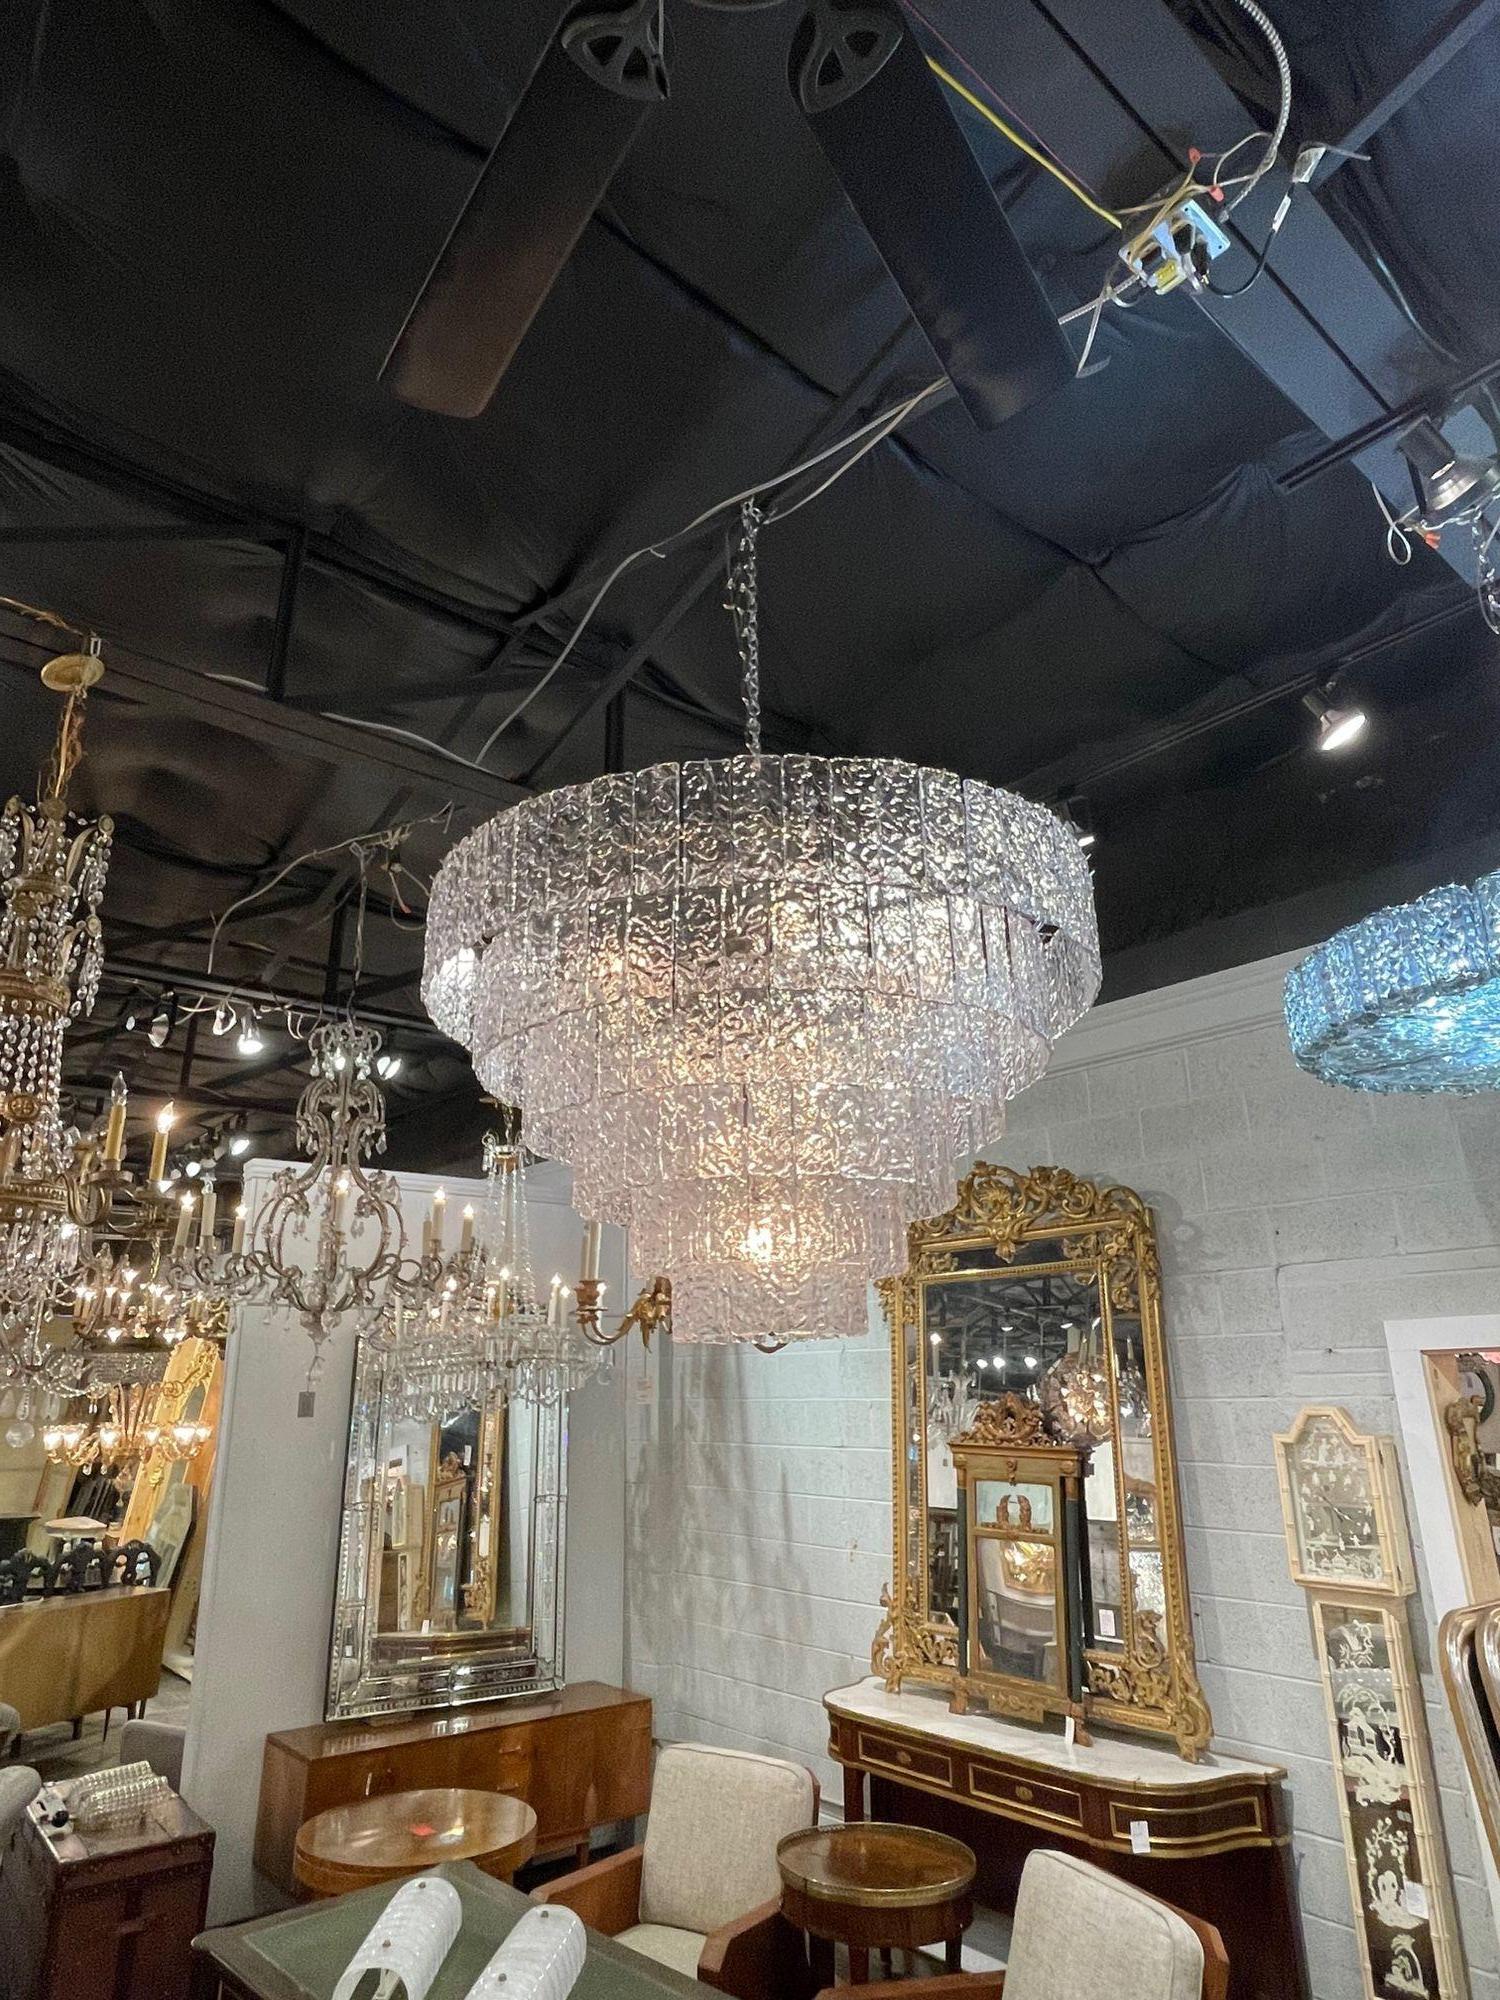 Very fine large scale Murano Glass waterfall Chandelier. Featuring beautiful translucent textured glass. Makes an extremely impressive statement!